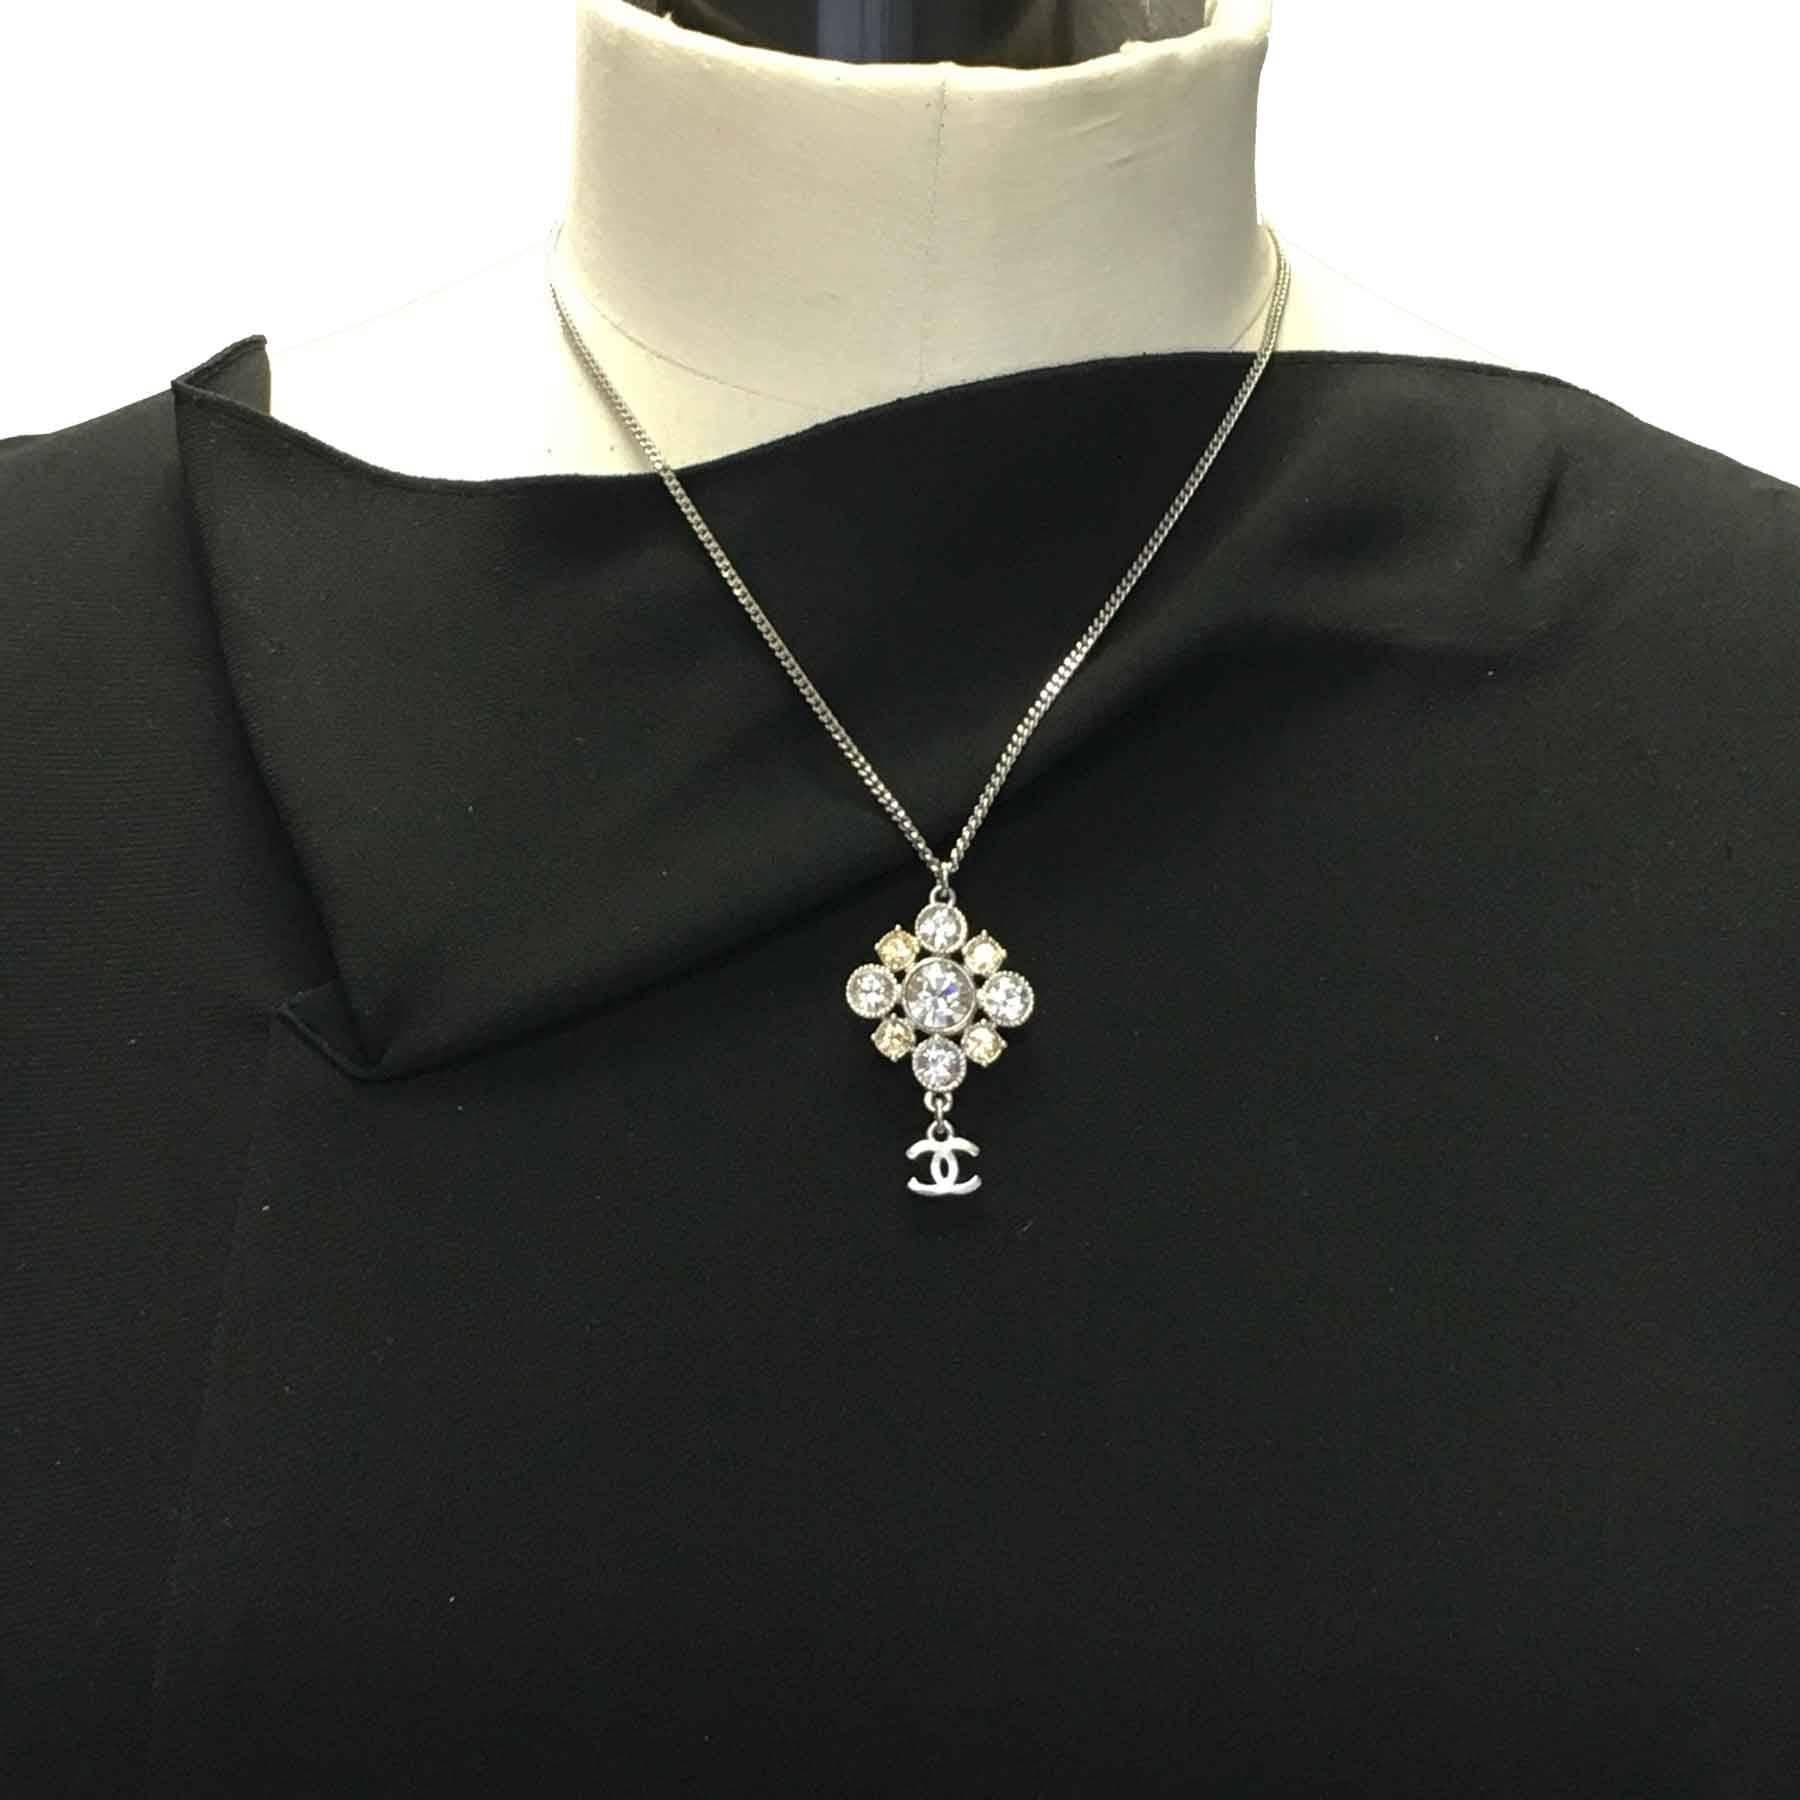 Chanel chain necklace with pendant in silver metal, CC and rhinestones. Collection Autumn / Winter 2012.

New condition.

The length of the chain is adjustable from 42 cm at the shortest to 48 cm at the longest.

Dimensions: Total length of the